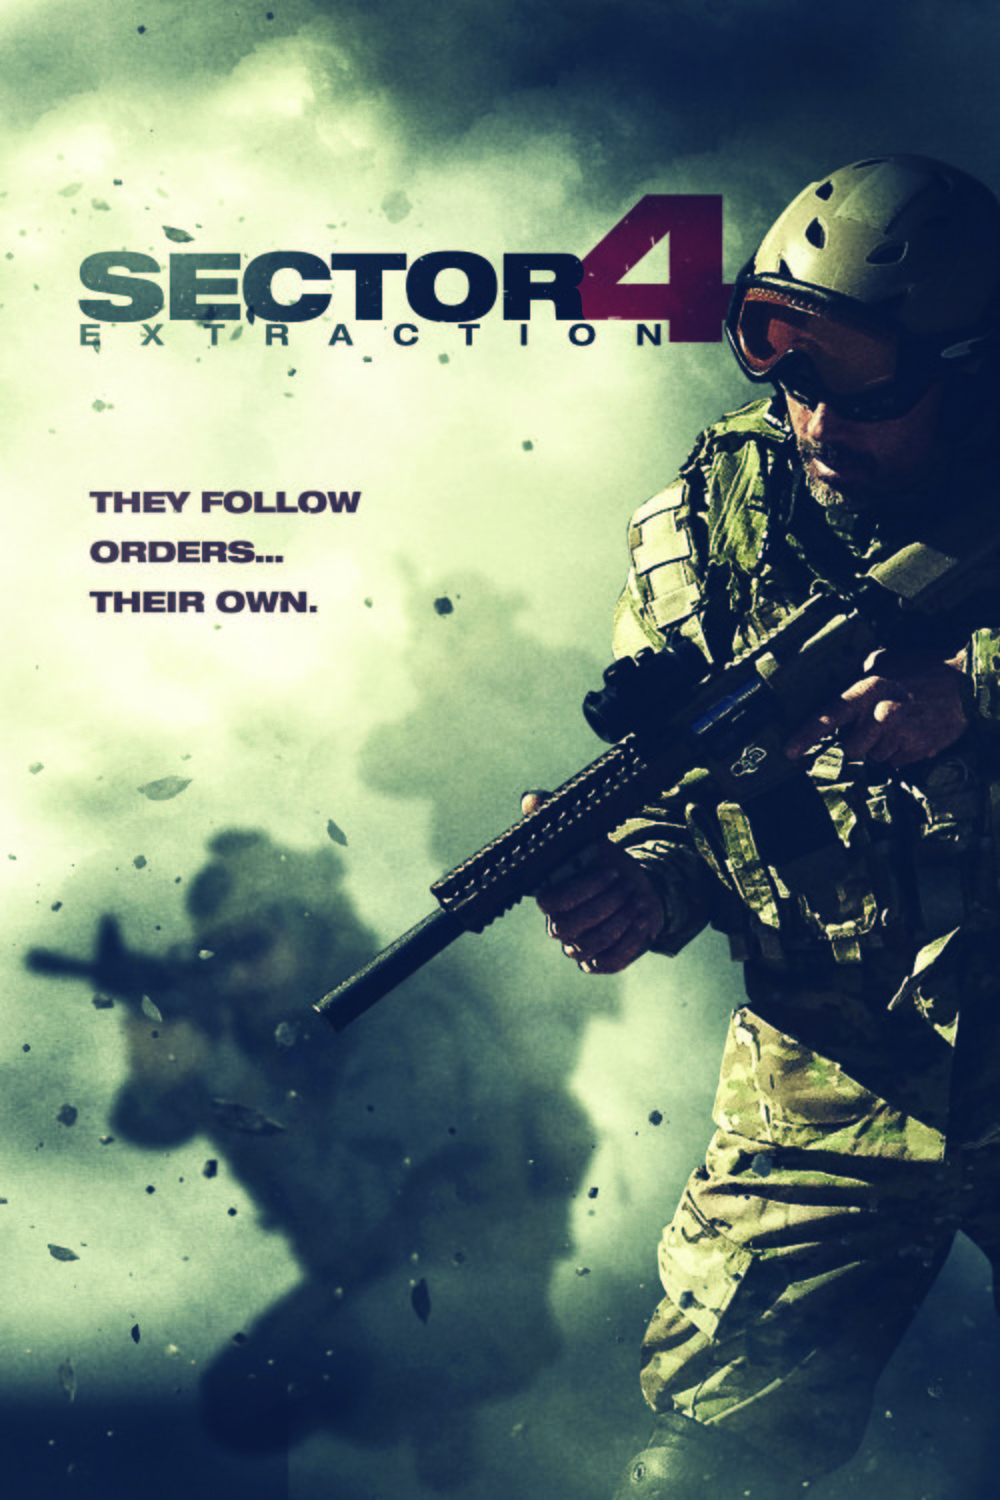 Poster of the movie Sector 4: Extraction